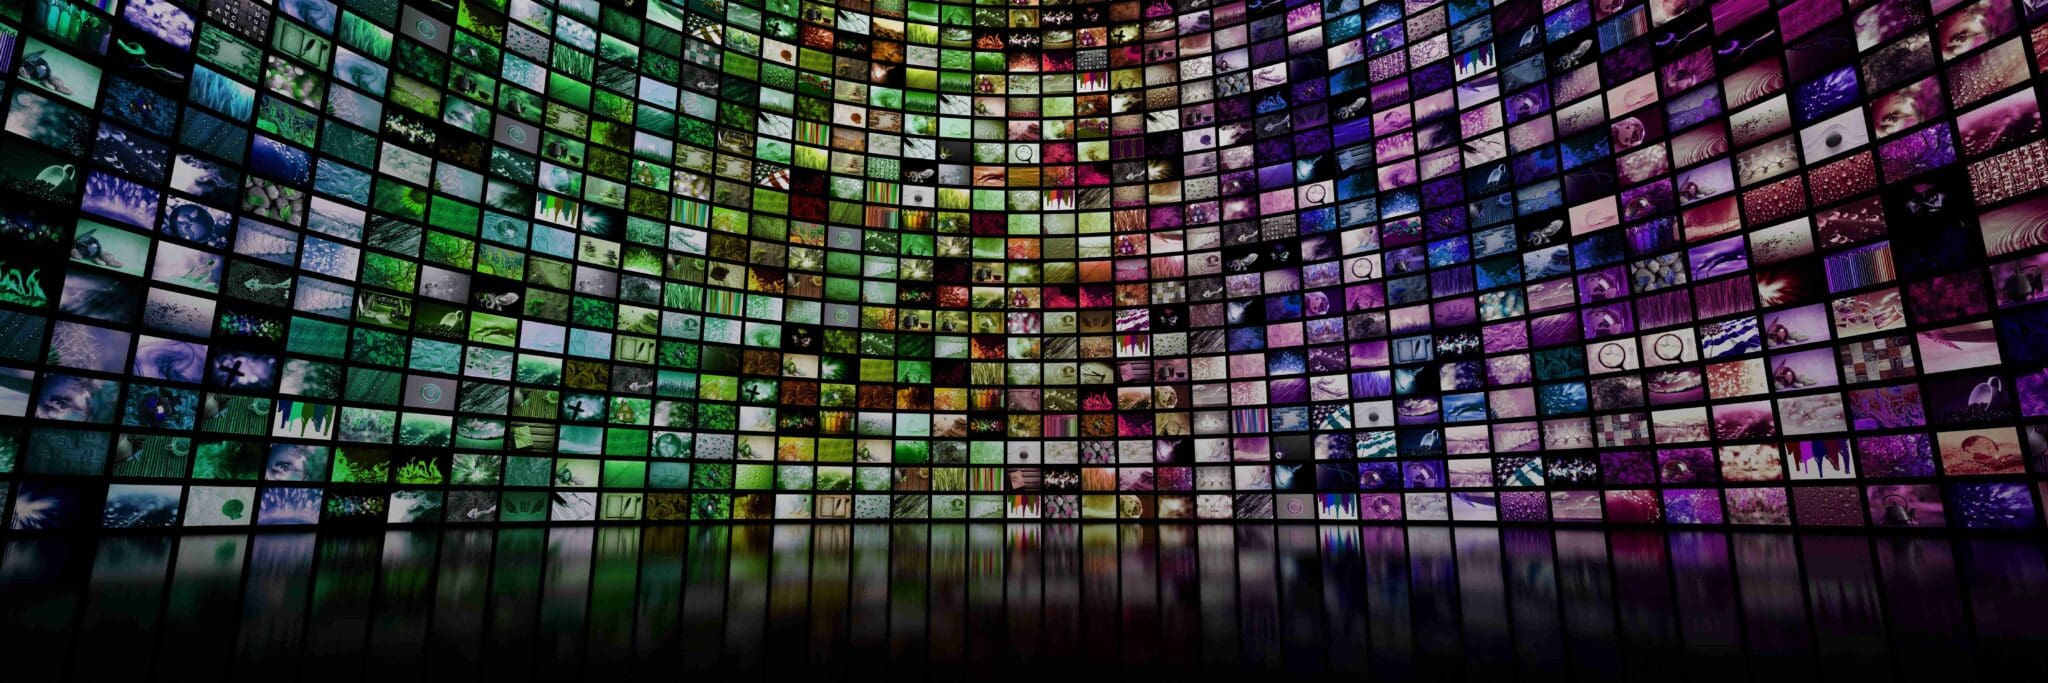 streaming of Colorful giant multimedia video and image wall, representing the digital transformation that is taking place